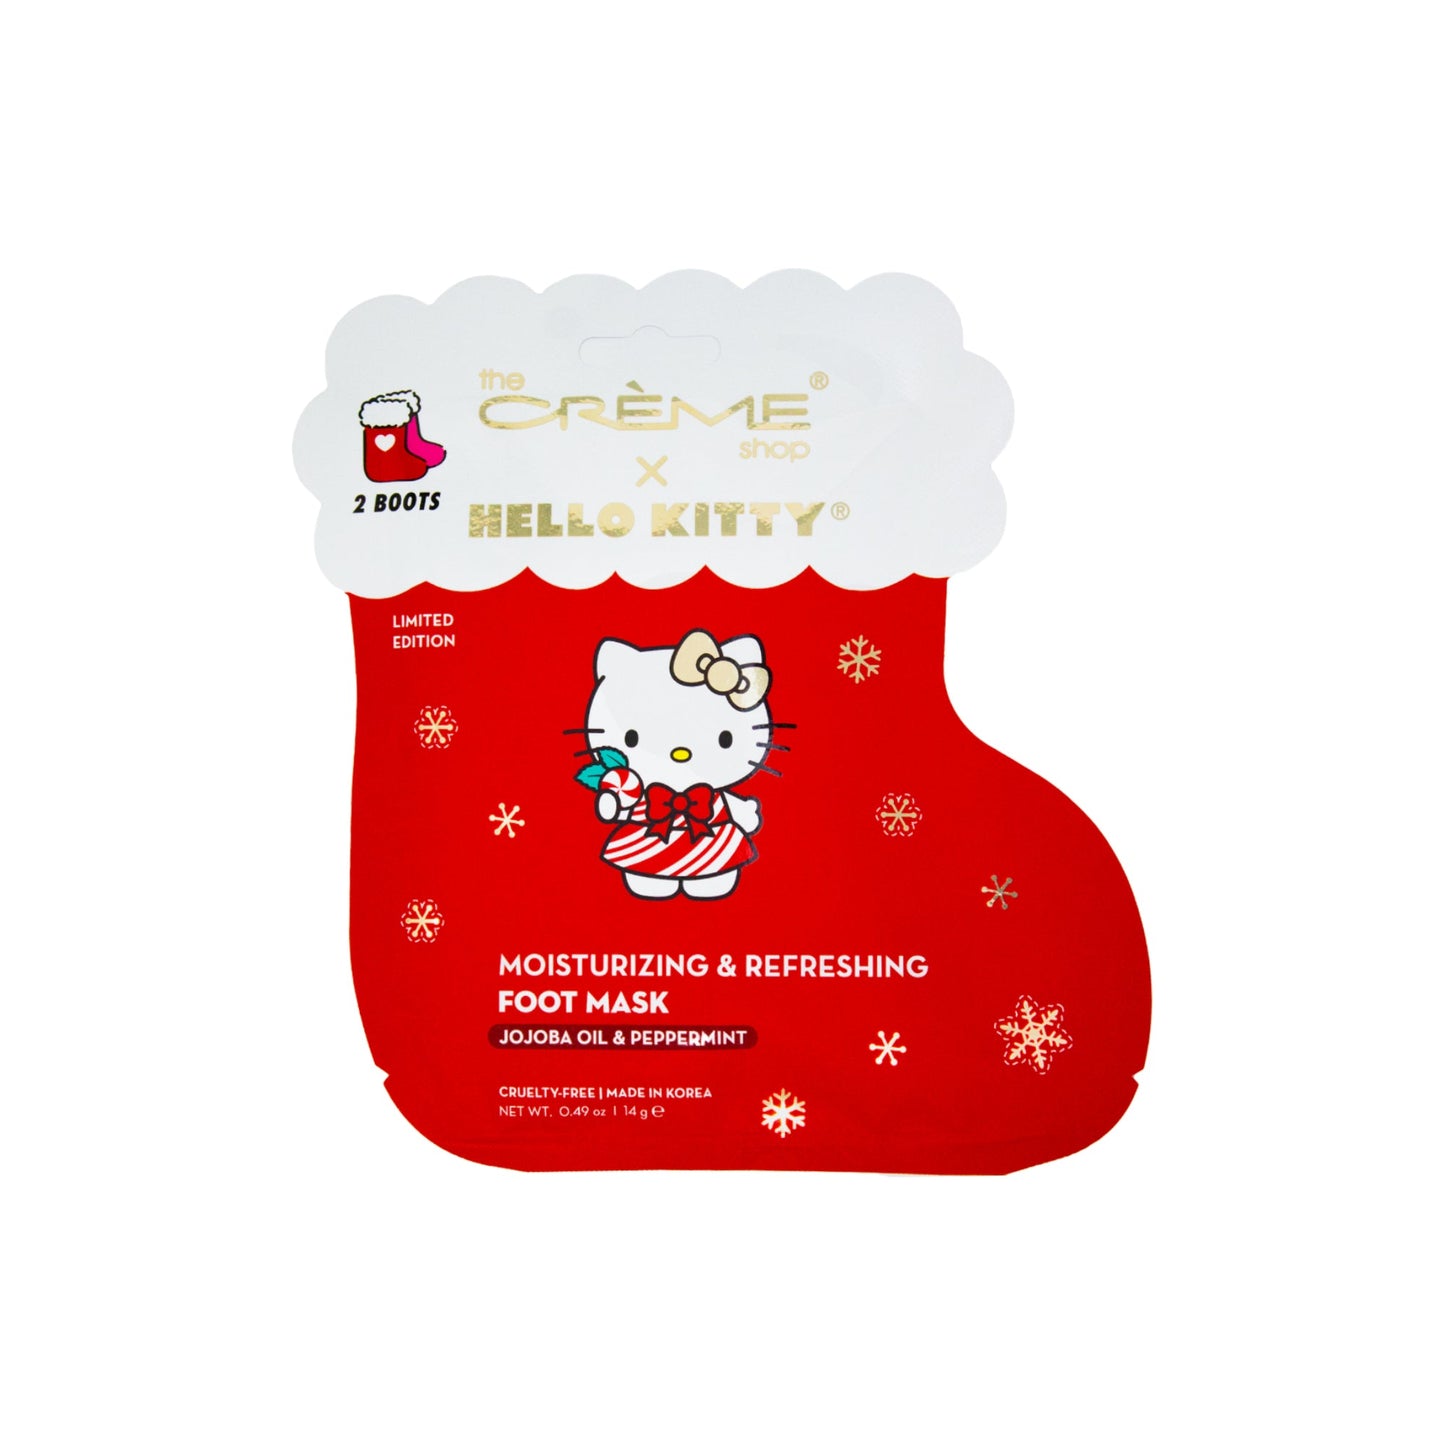 Hello Kitty Minty Fresh Soles Foot Mask (Set of 3) Foot Masks - The Crème Shop x Sanrio 